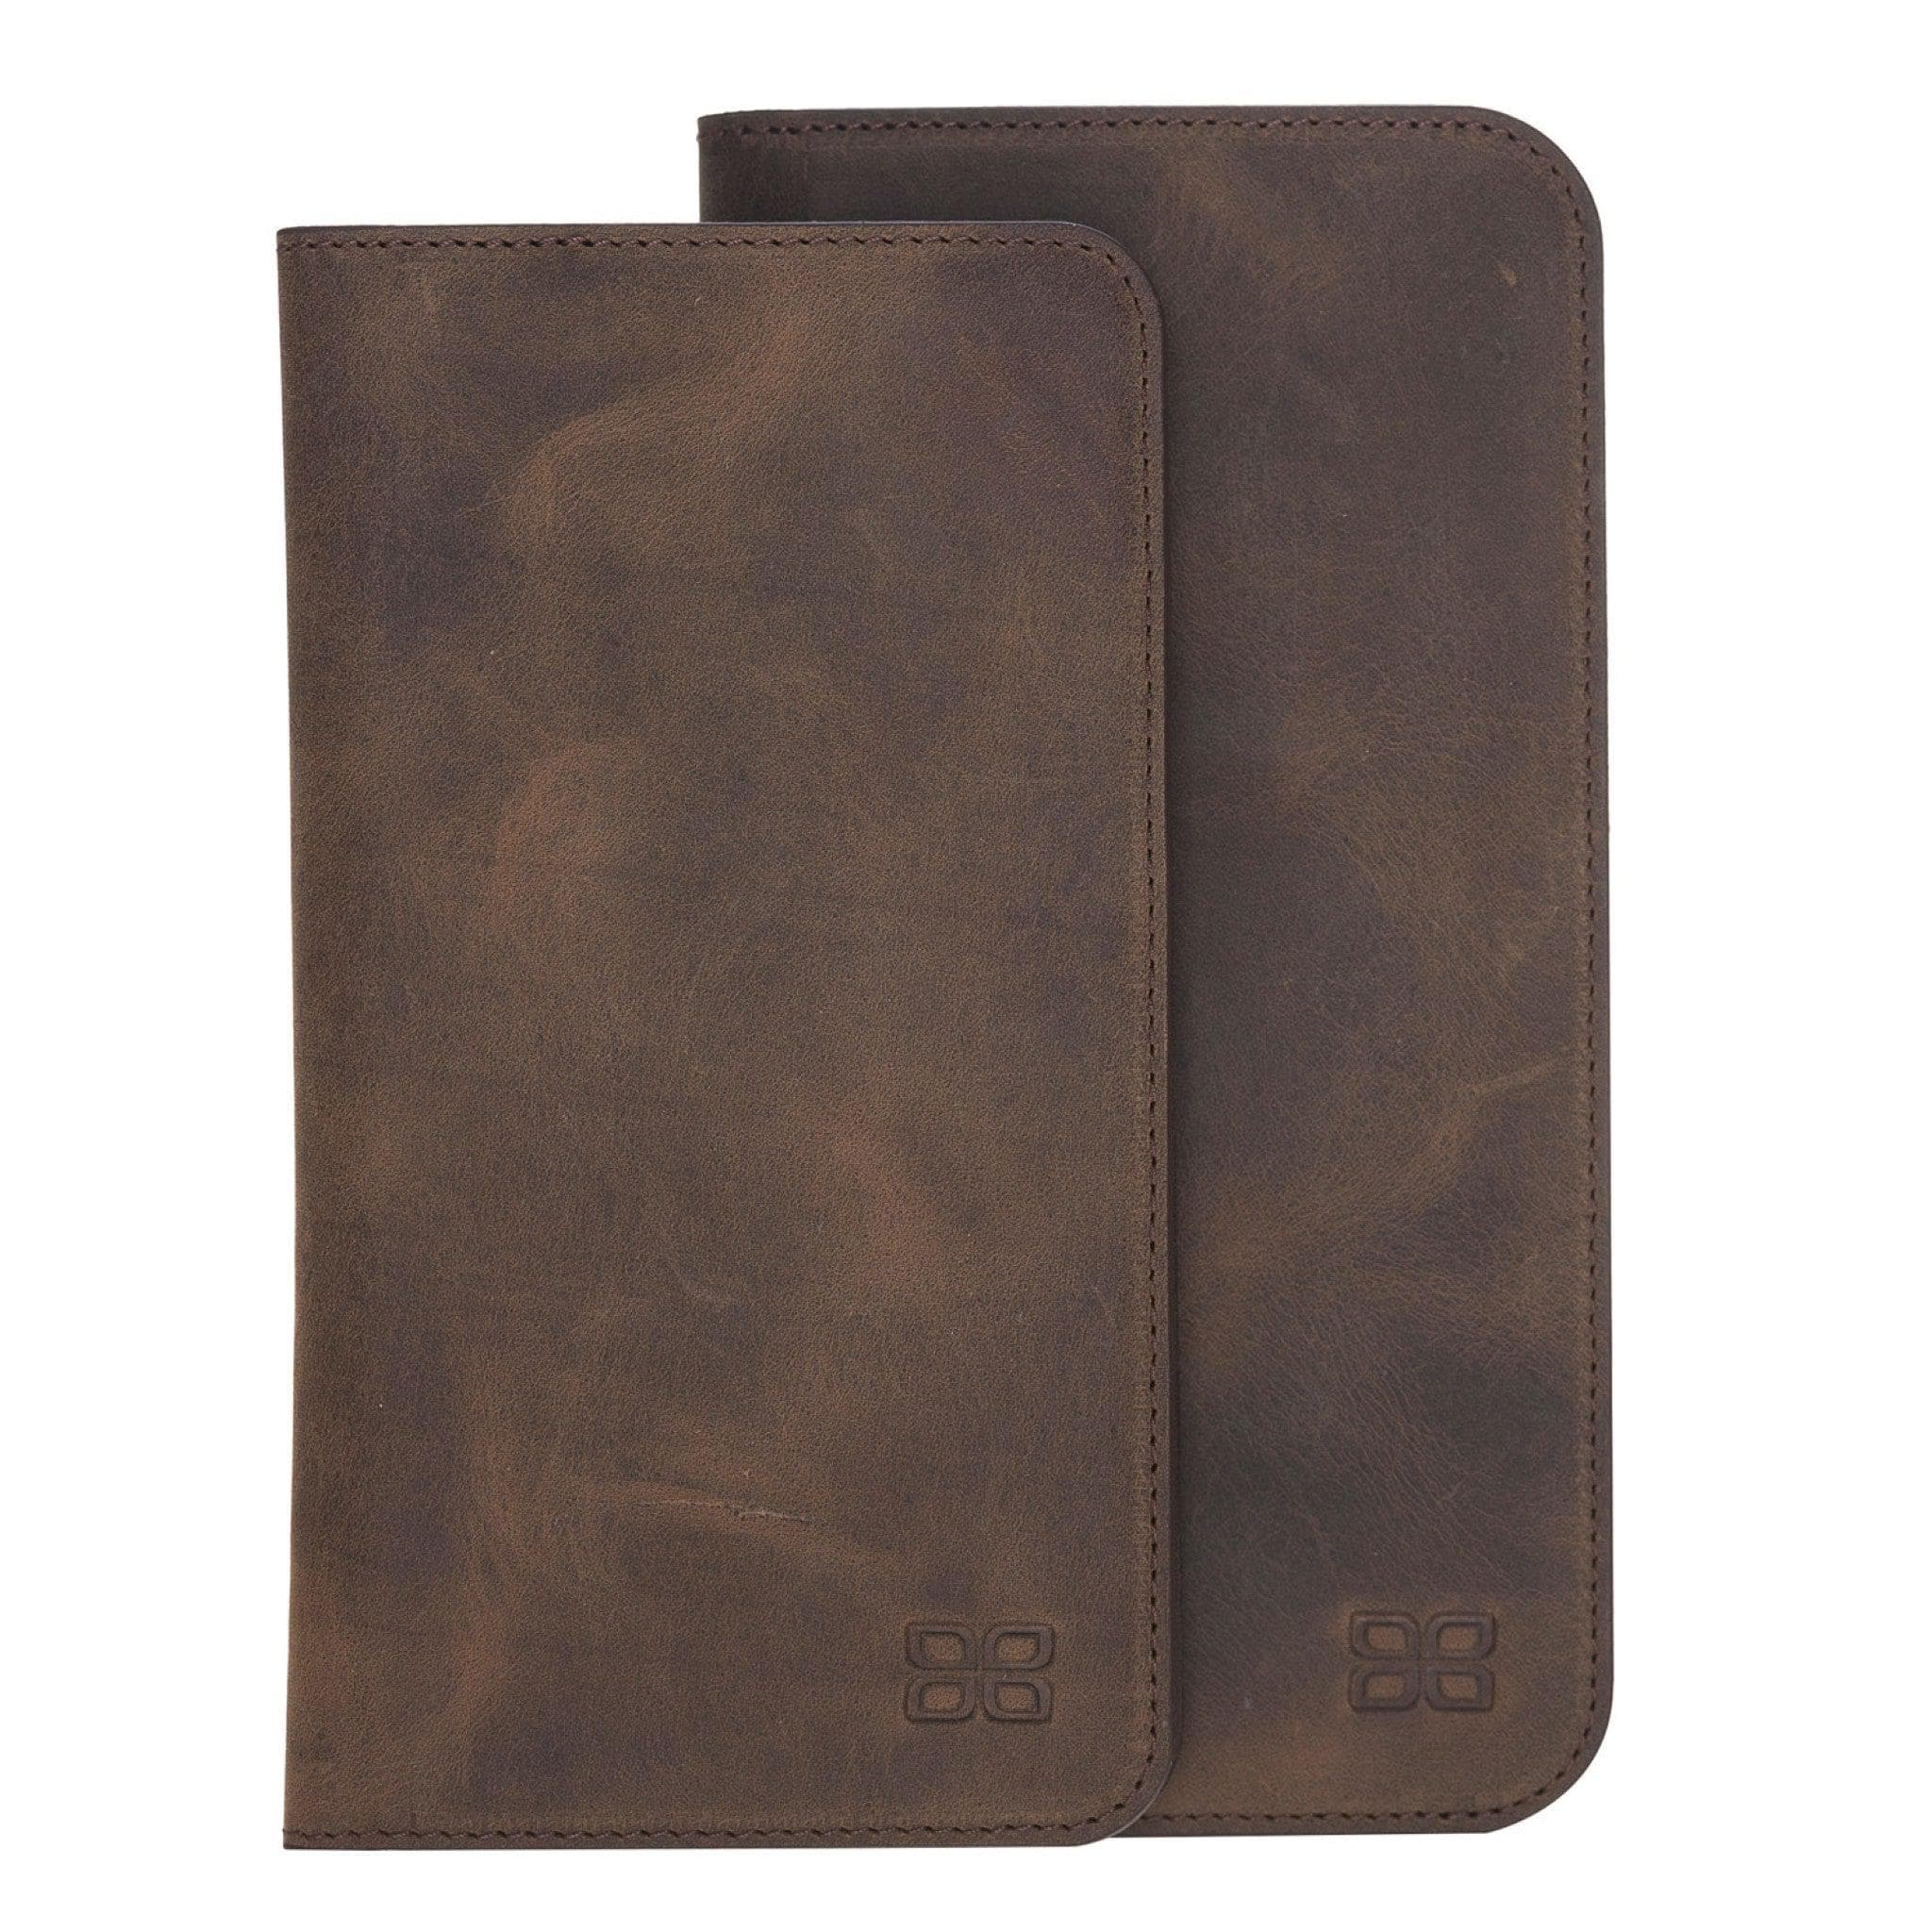 Universal Grip Genuine Leather Wallet Compatible with Phones up to 5.7" Bouletta LTD